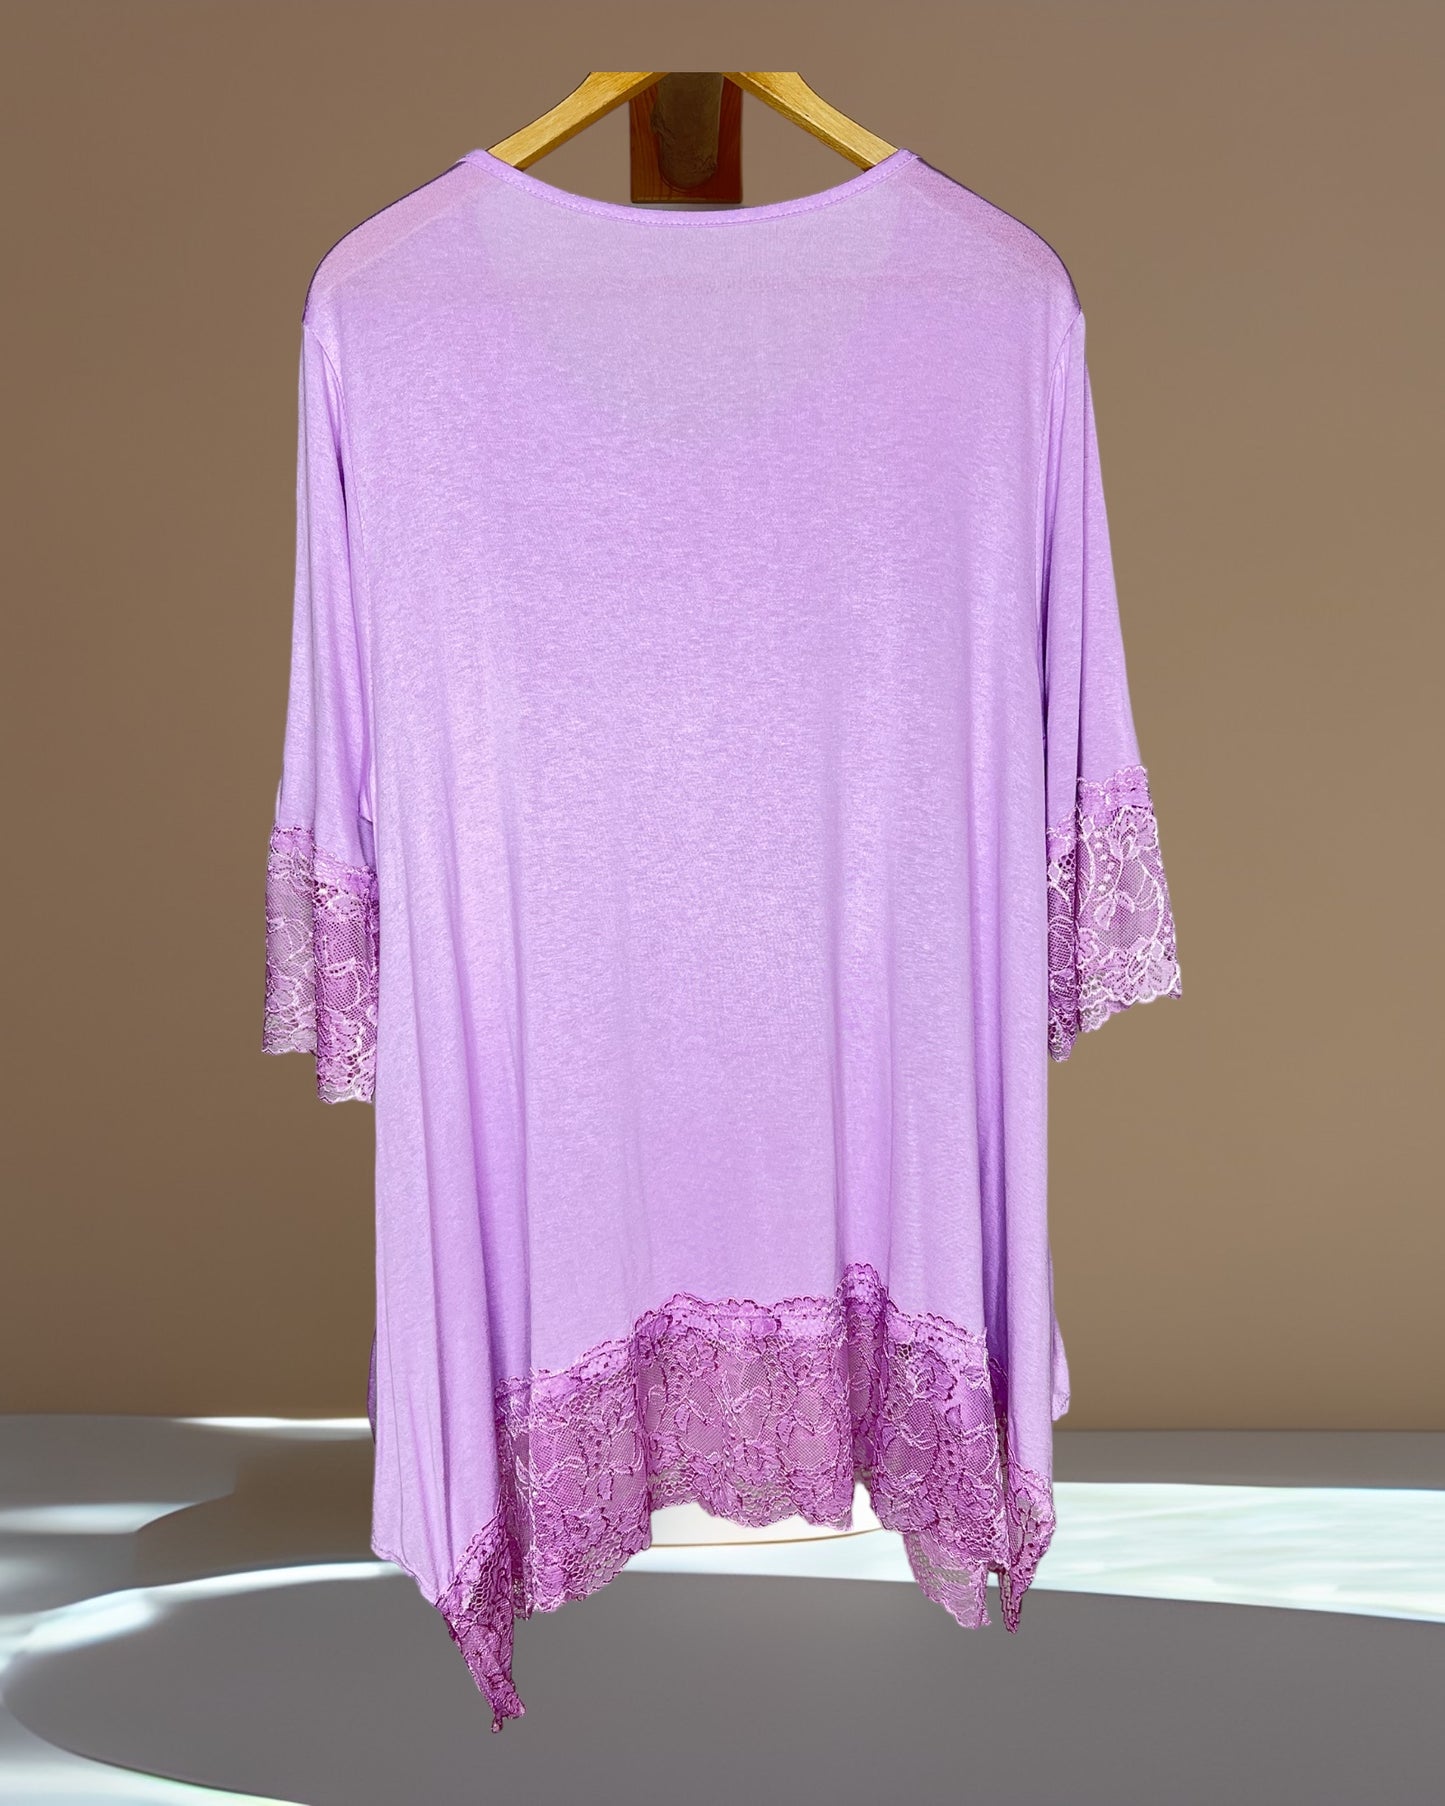 CINDY - TOP LILAS TAILLE 46 A 56/58